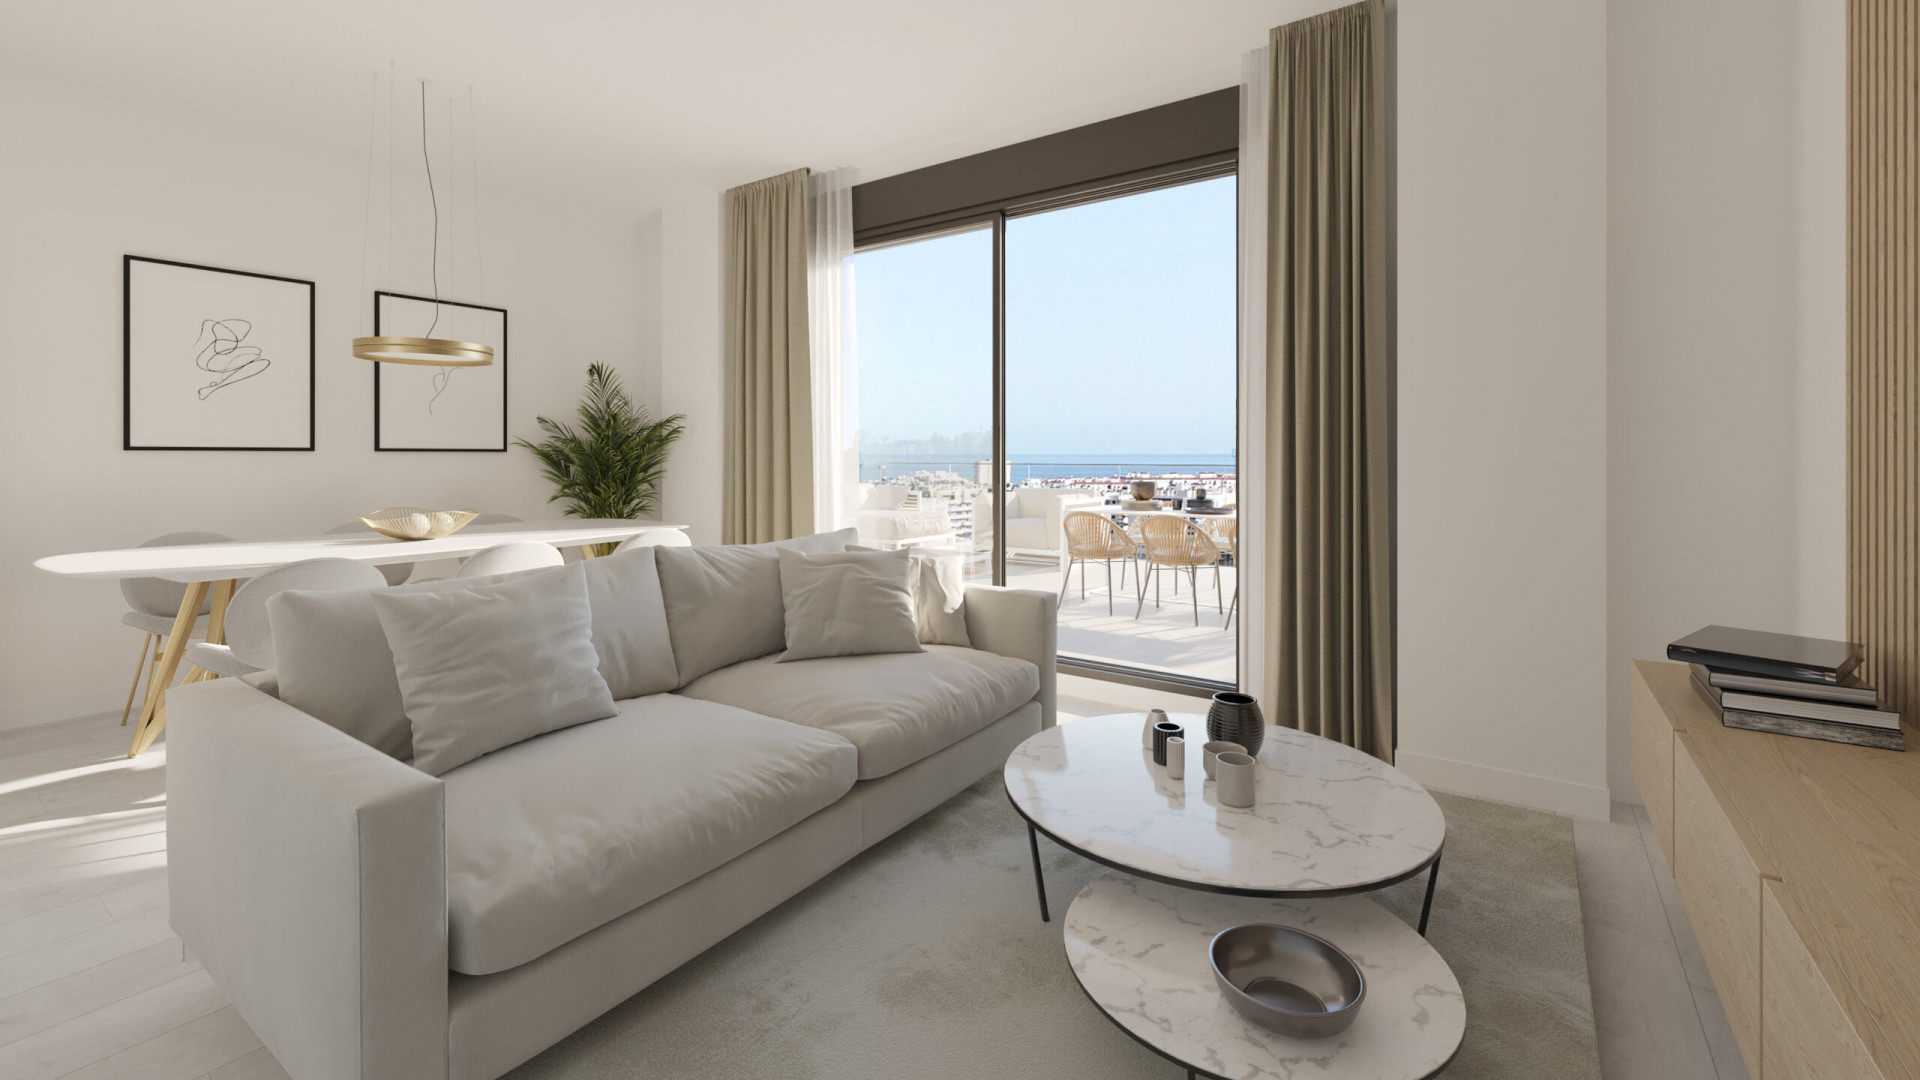 Atica Homes: Contemporary flats with views in a privileged setting in Estepona. | Image 6